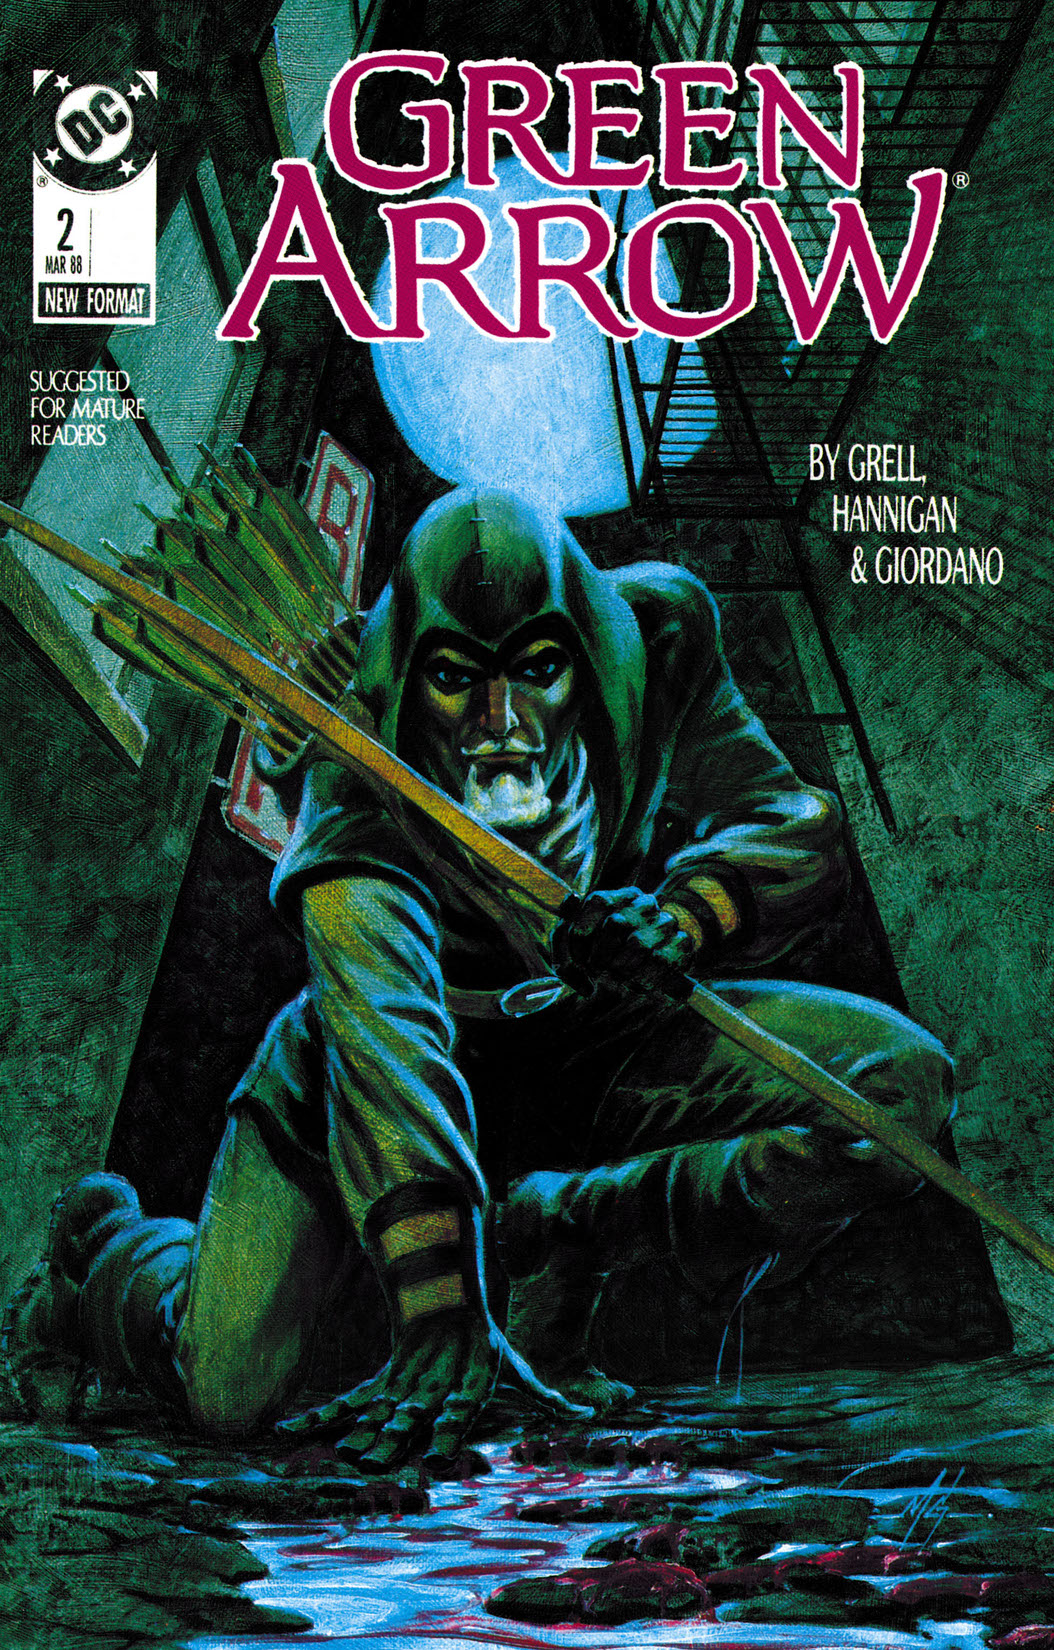 Green Arrow (1987-) #2 preview images